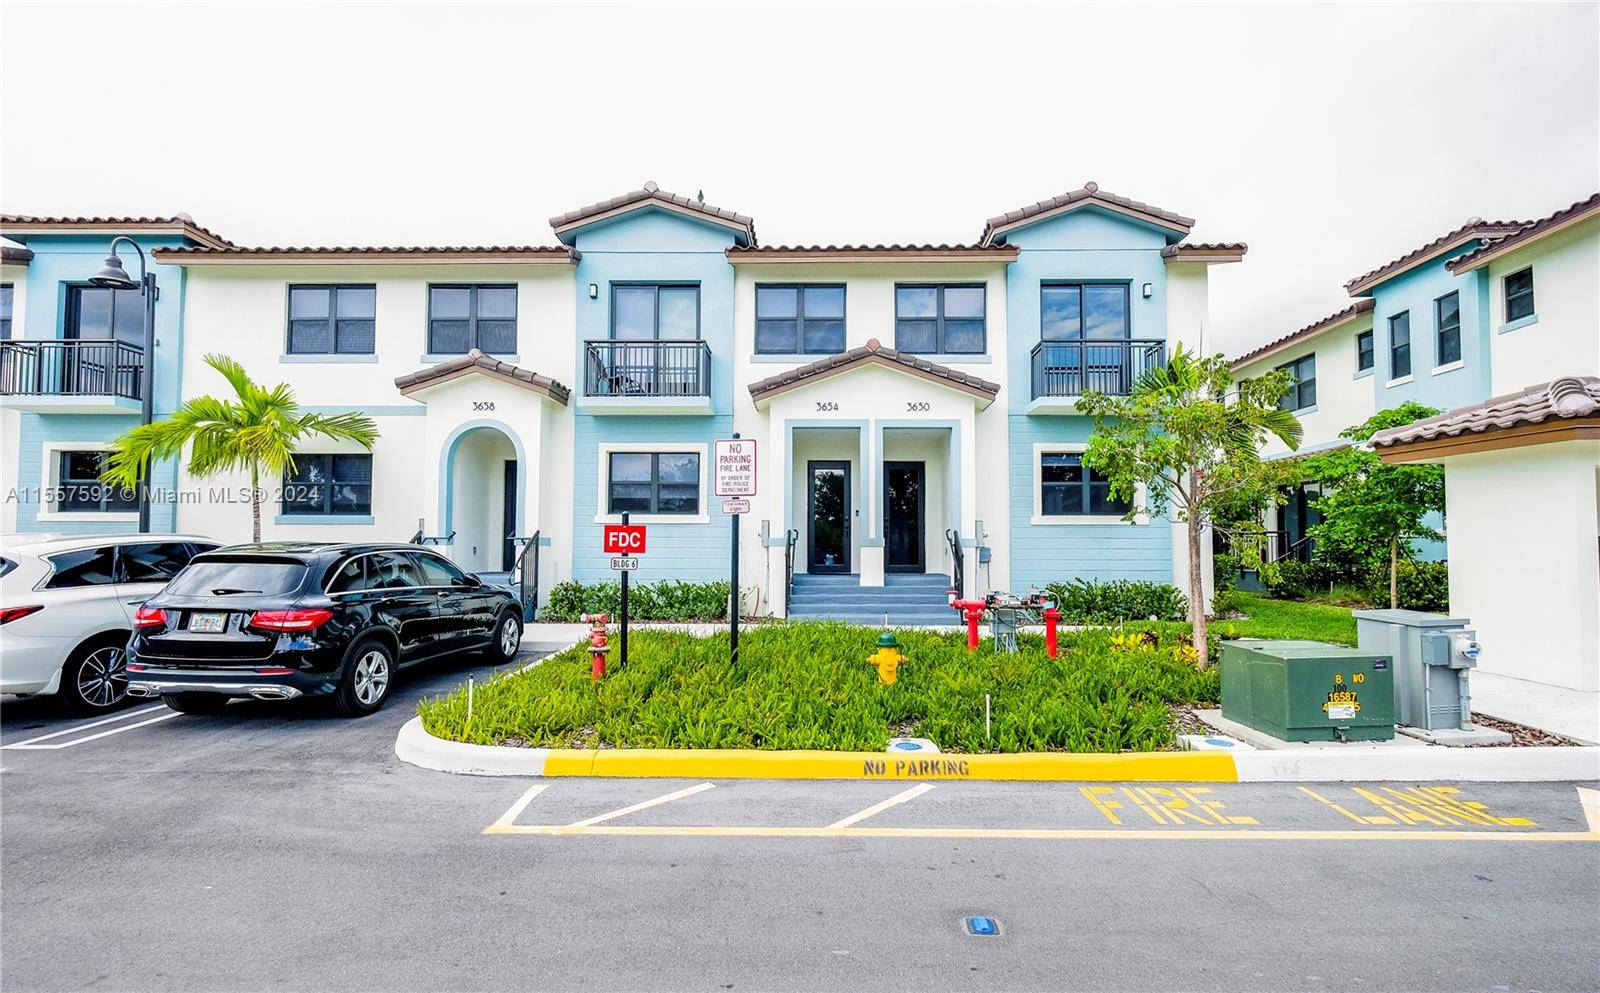 Beautiful Townhome positioned in the Positano community of Miramar.